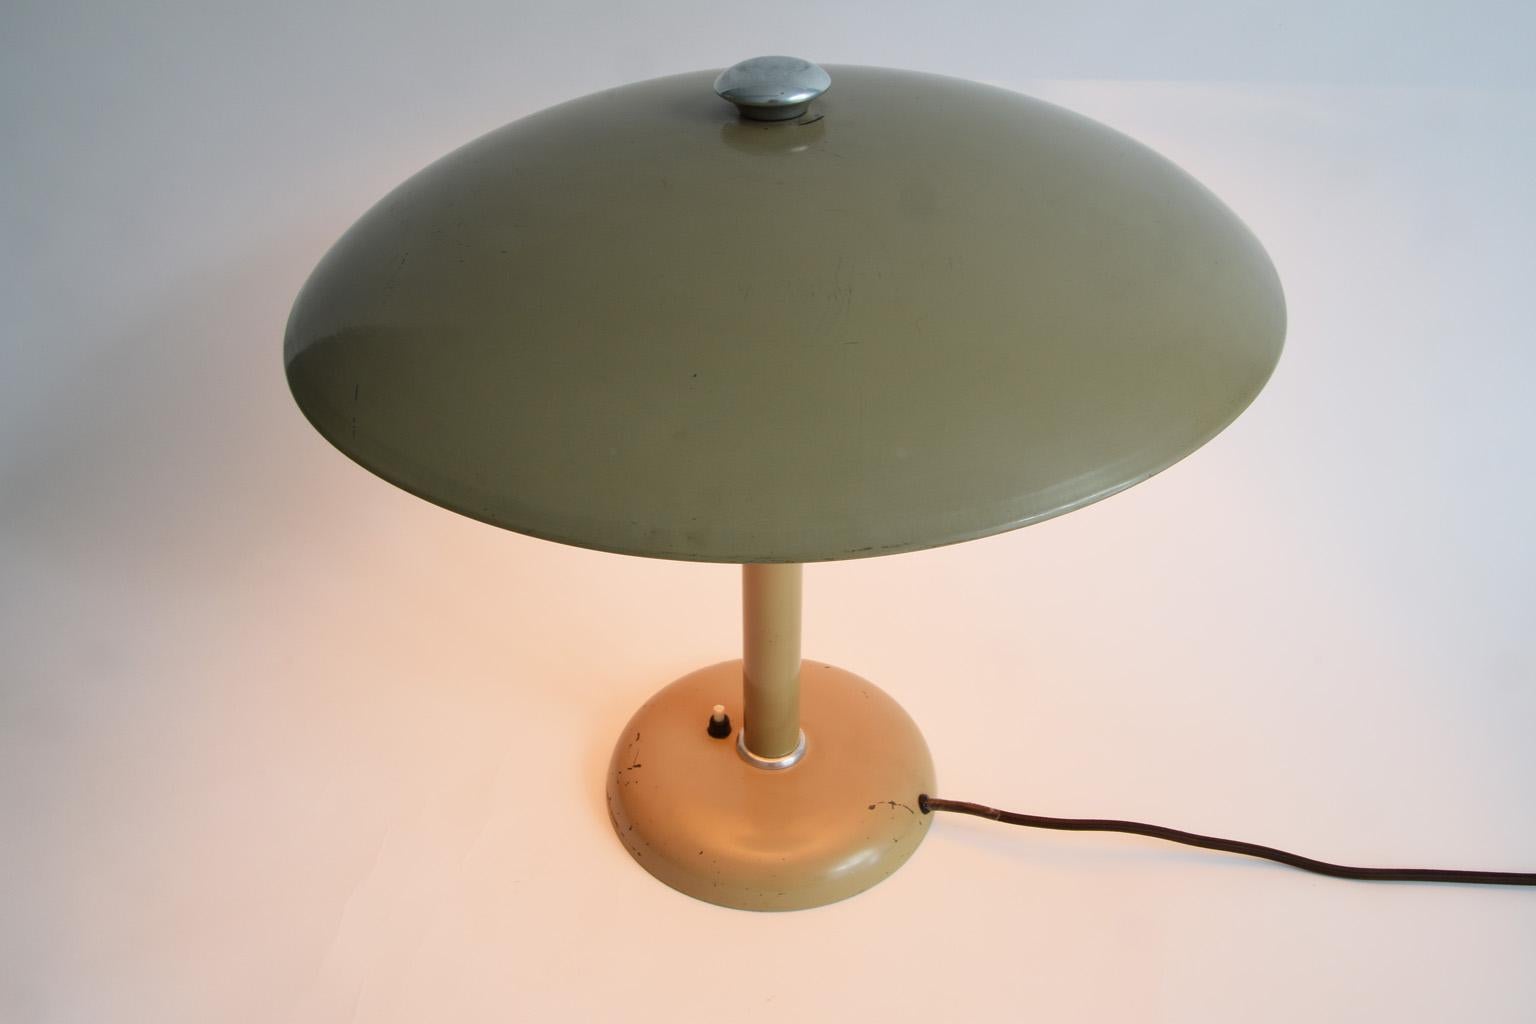 Metal Table Lamp by Max Schumacher for Werner Schröder Bauhaus, Germany, 1934 For Sale